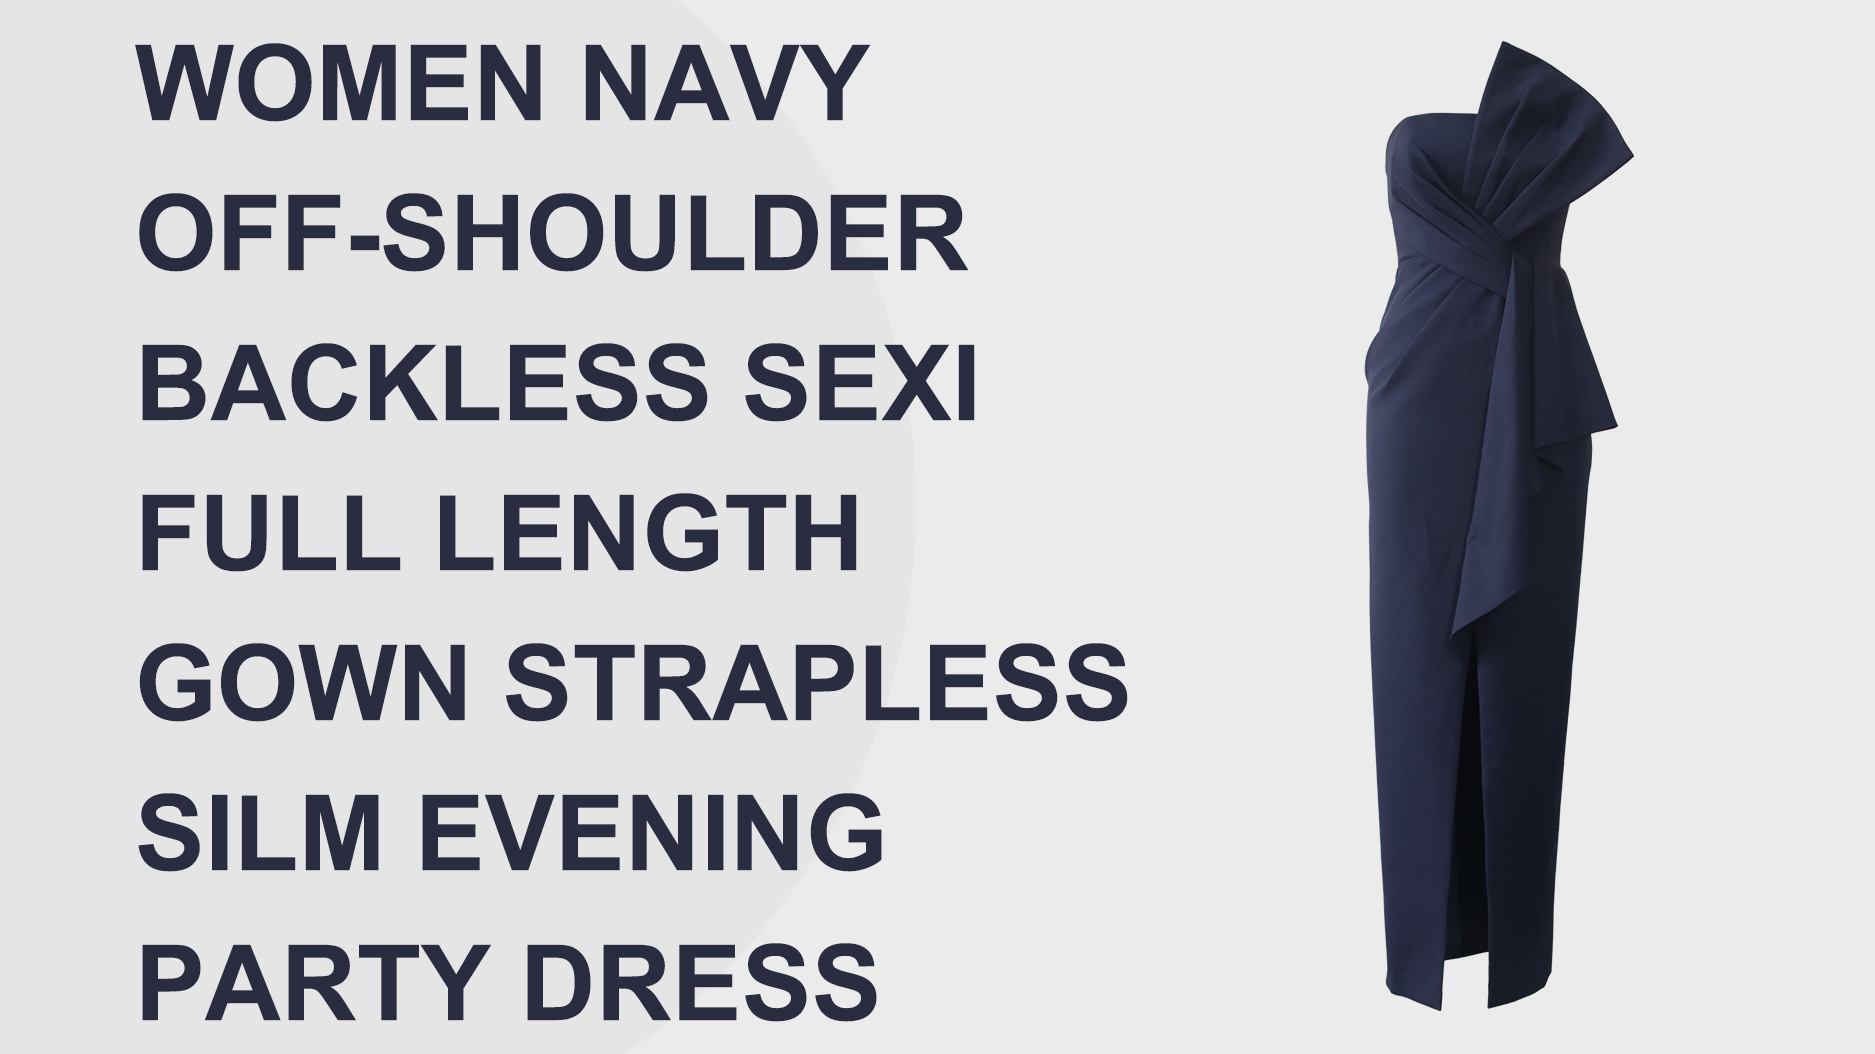 Evening Party Dress Women Navy off-Shoulder Backless Gown